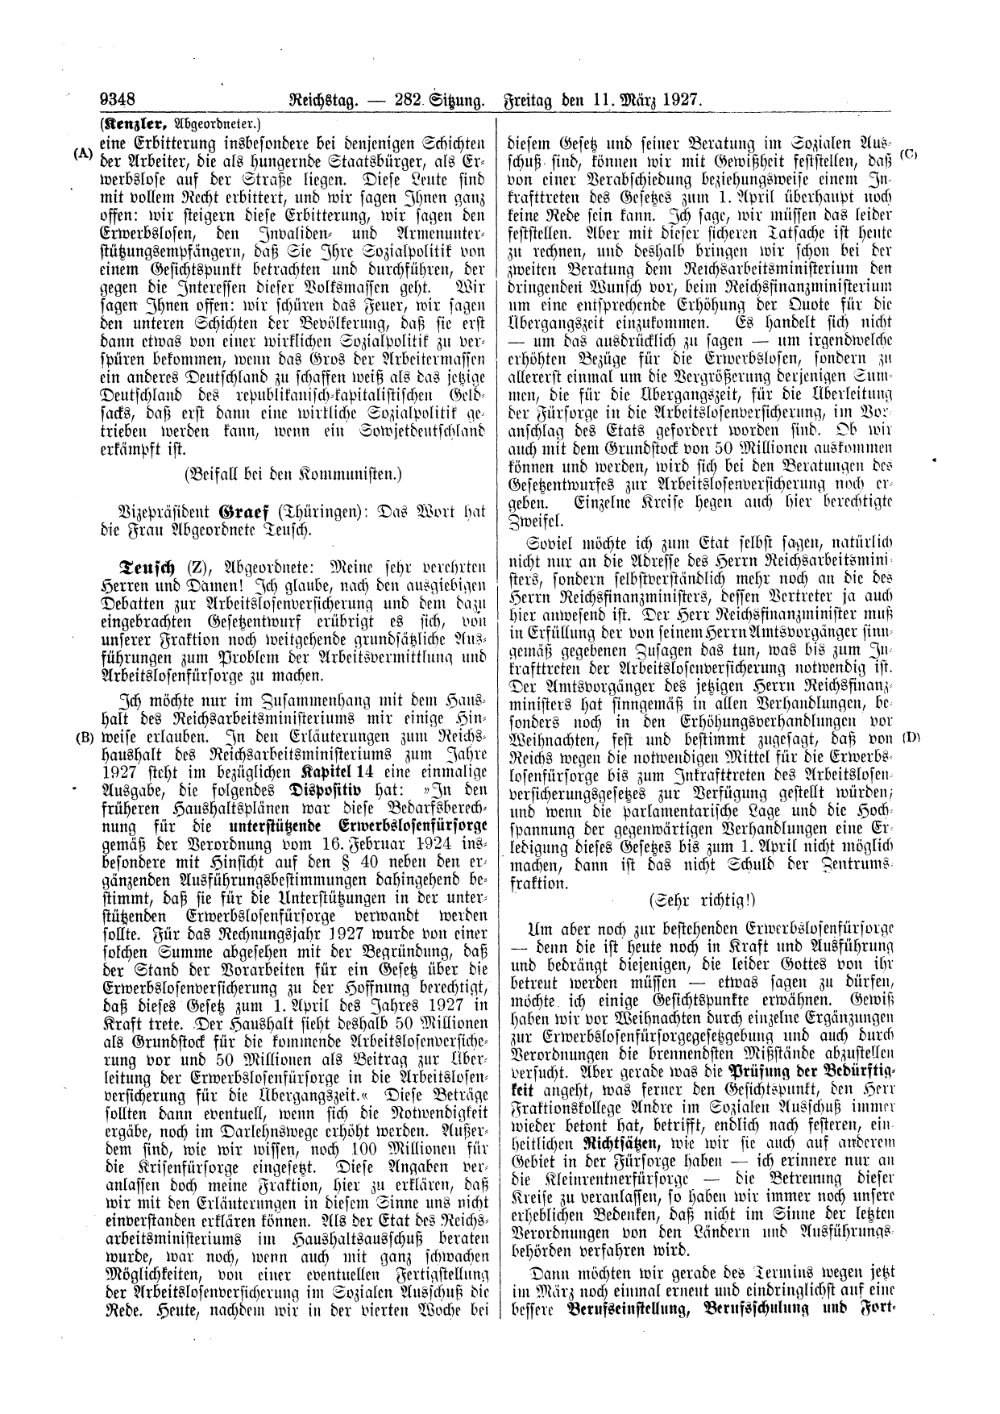 Scan of page 9348